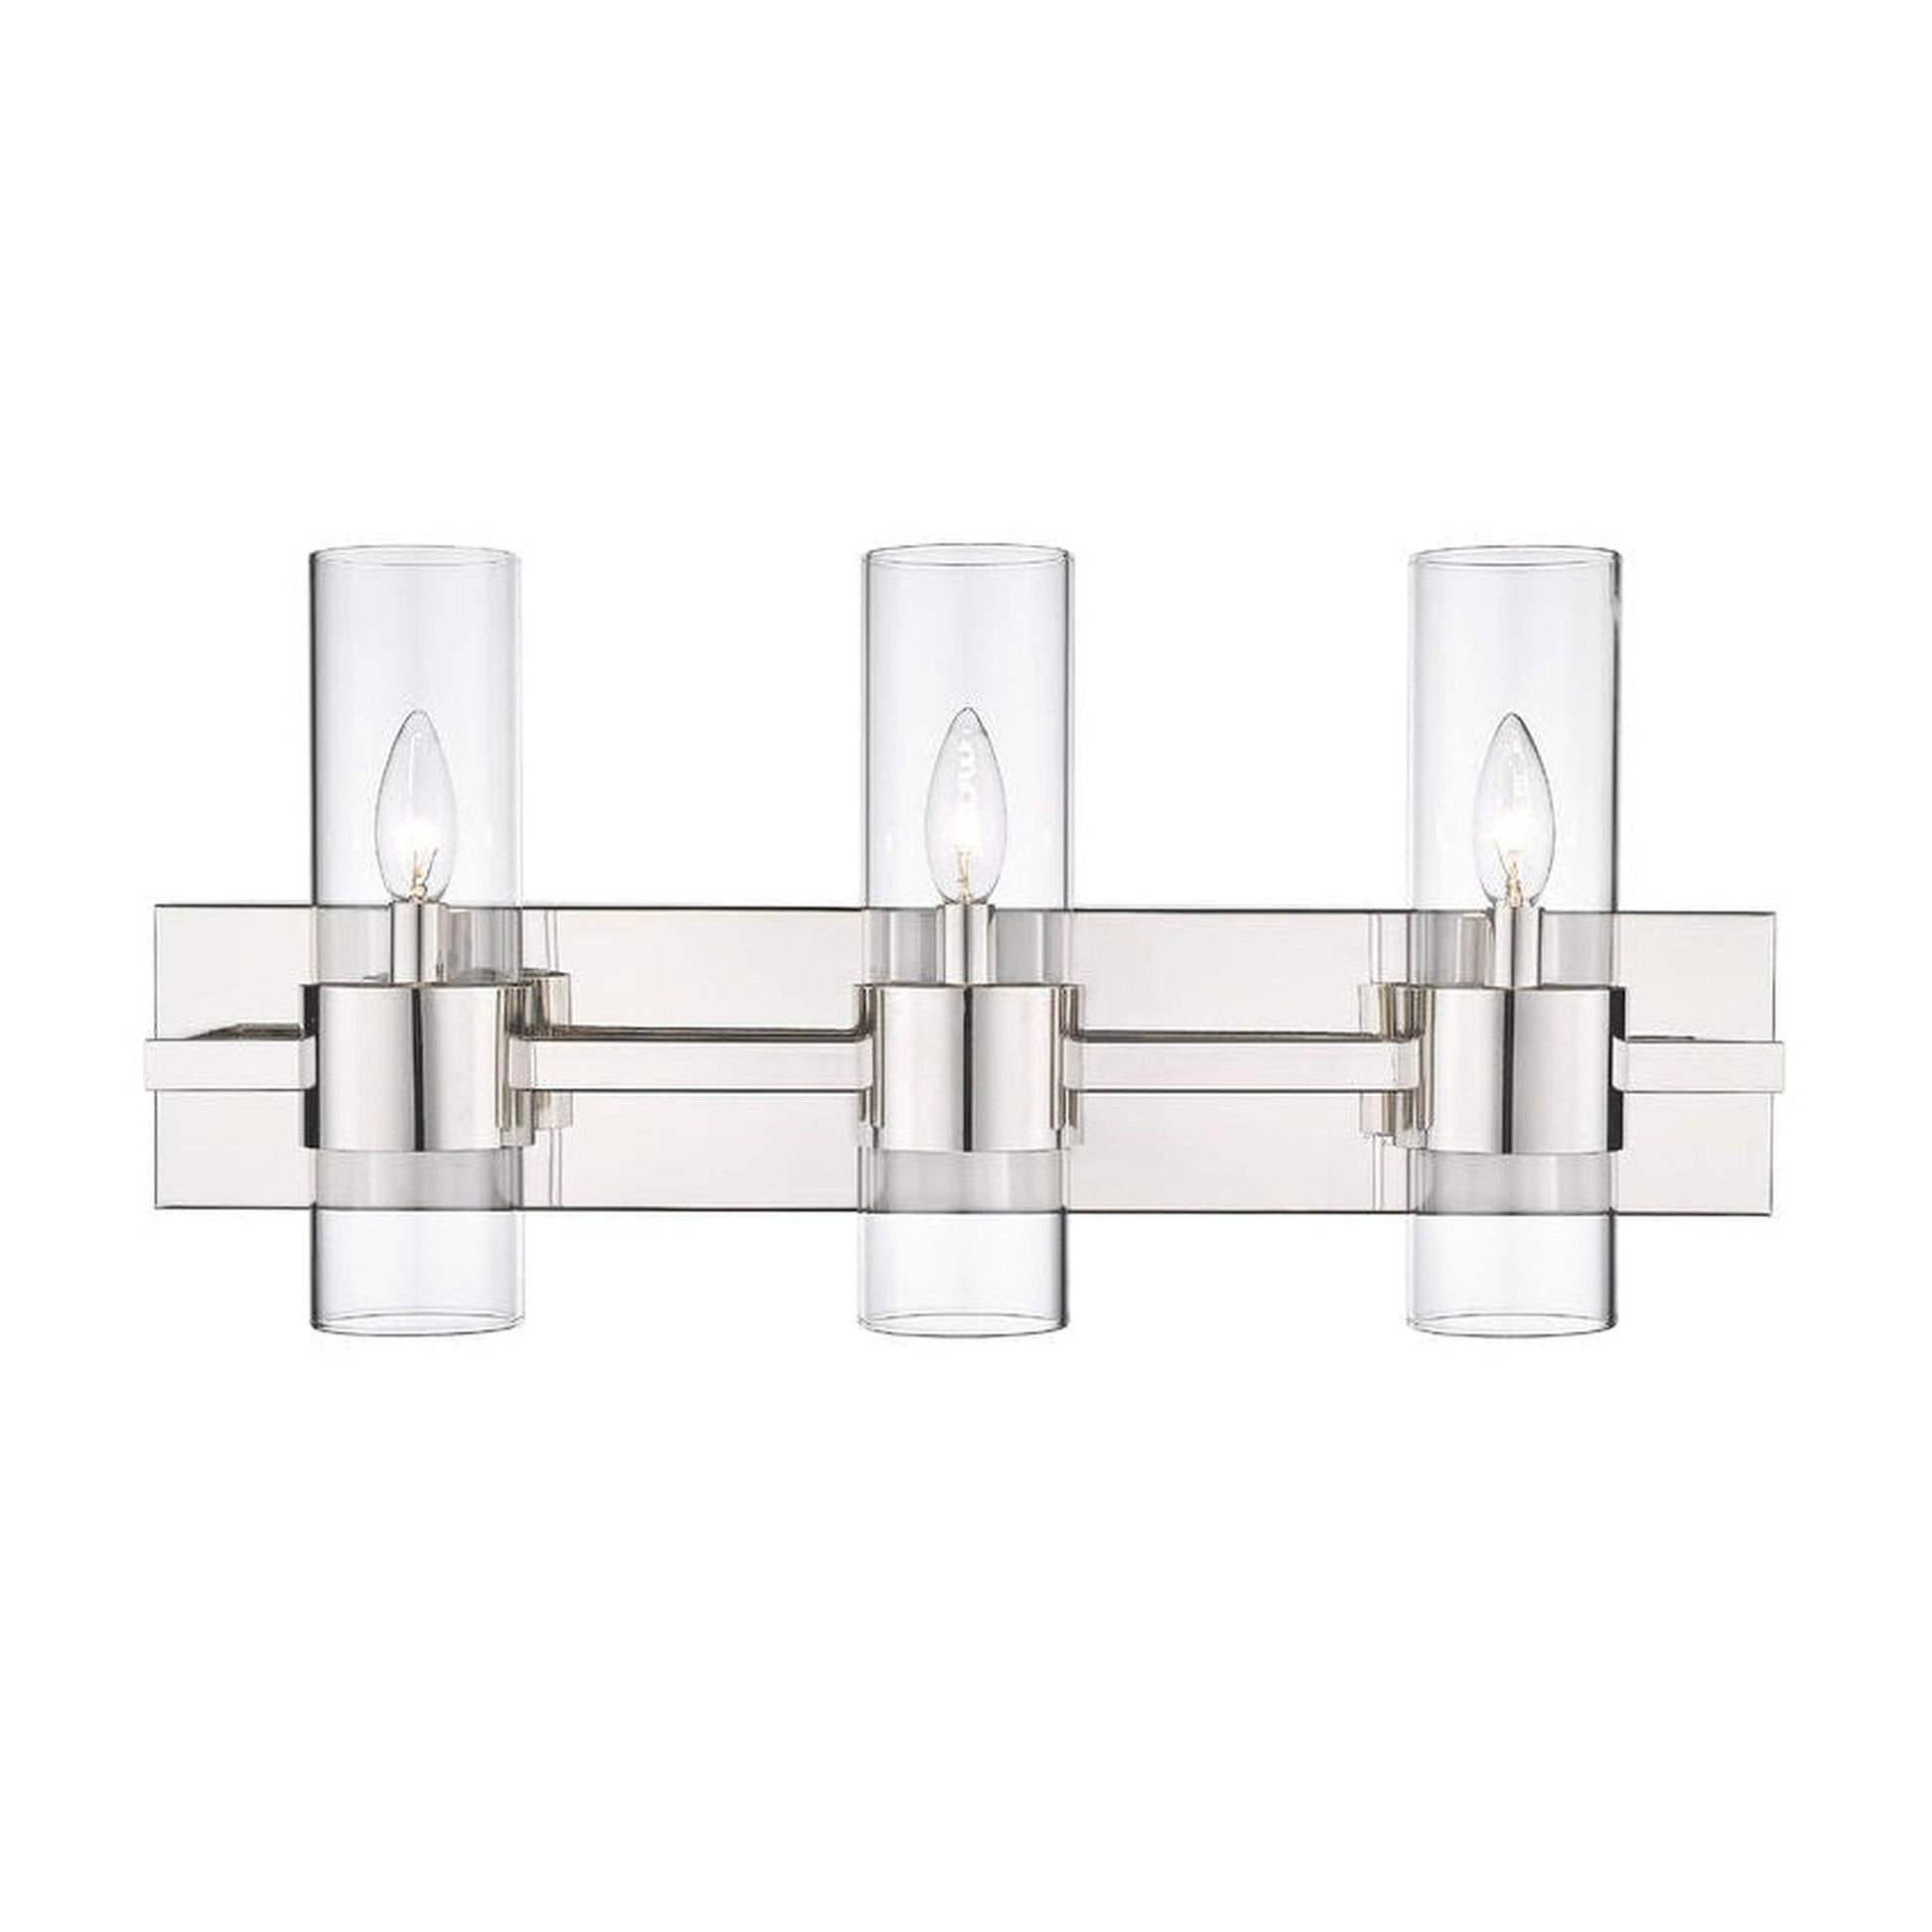 Z-Lite Lawson 25" 3-Light Polished Nickel Vanity Light With Clear Glass Shade